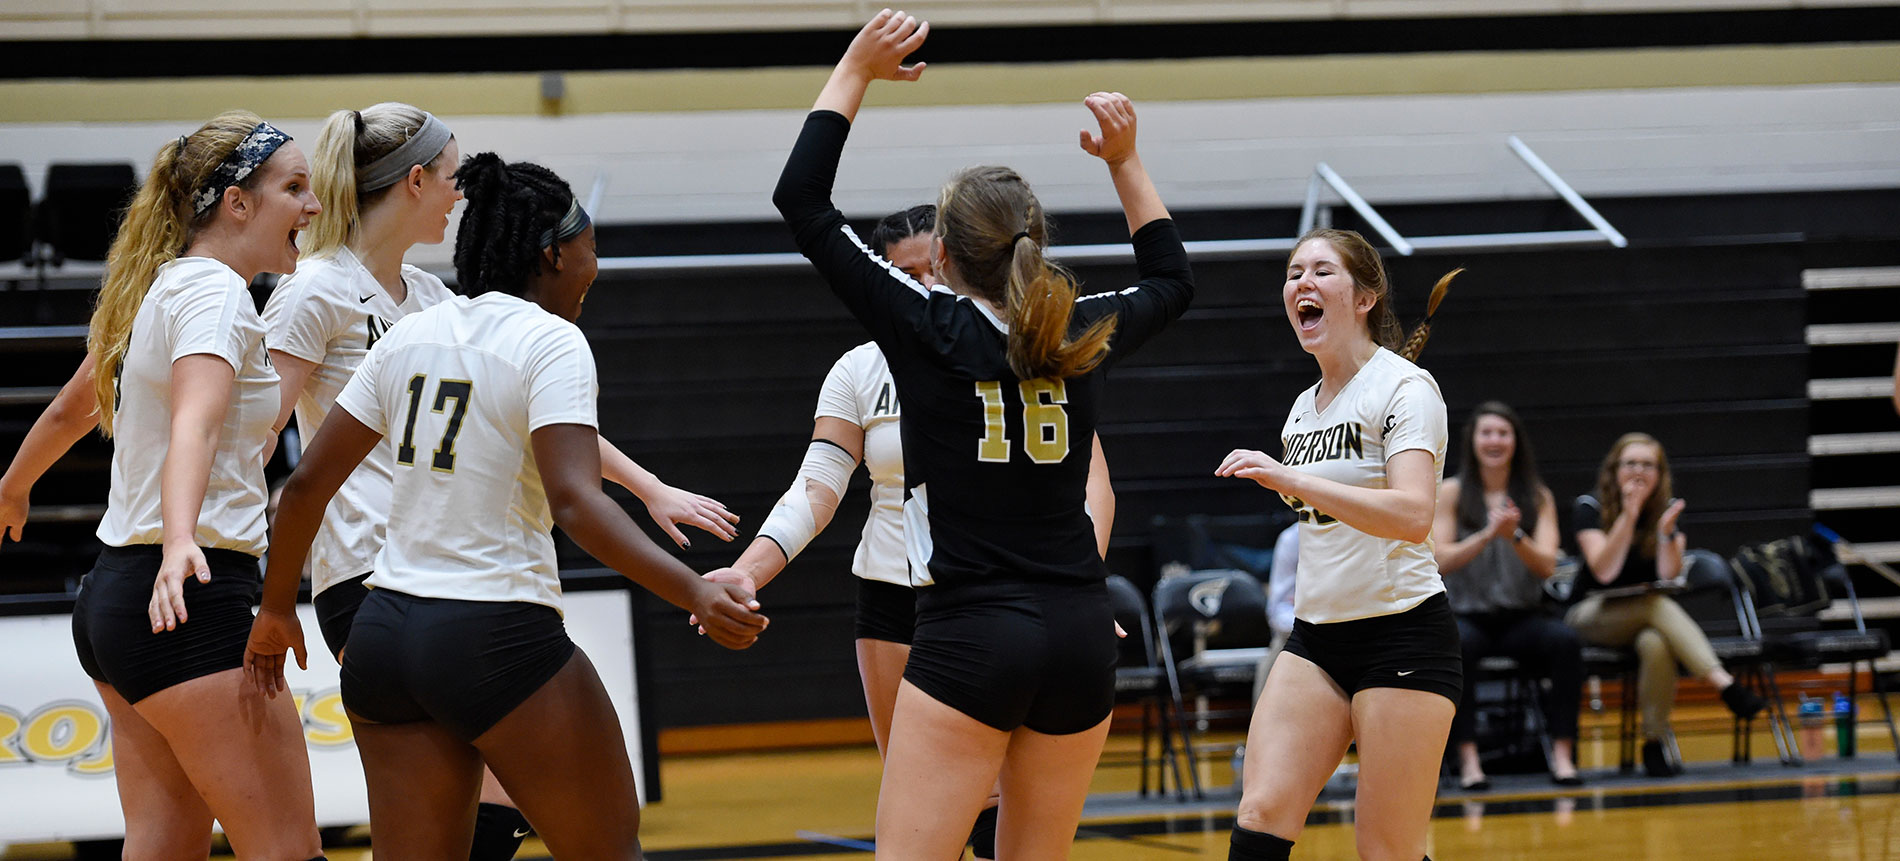 Trojans Notch 12th Sweep of the Season with Win over Mars Hill